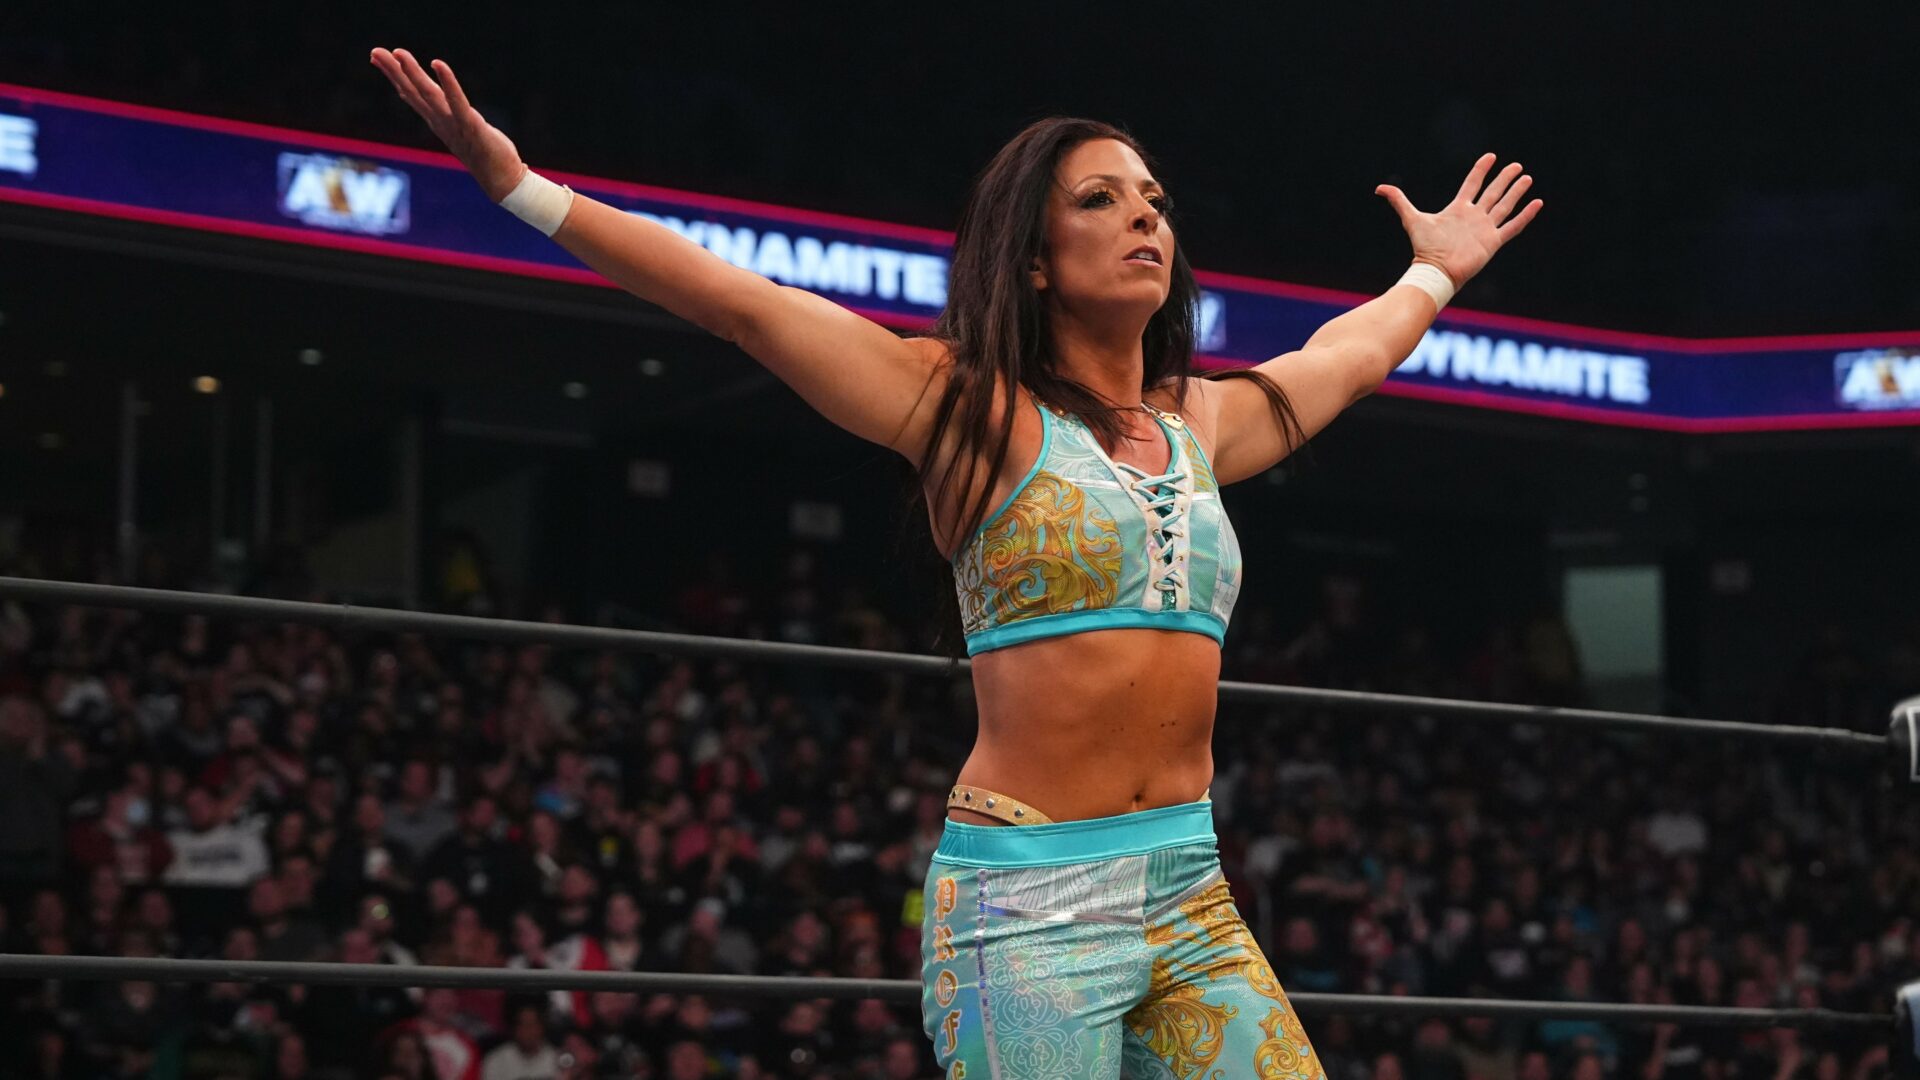 Serena Deeb Cleared For Return Following Major Health Scare